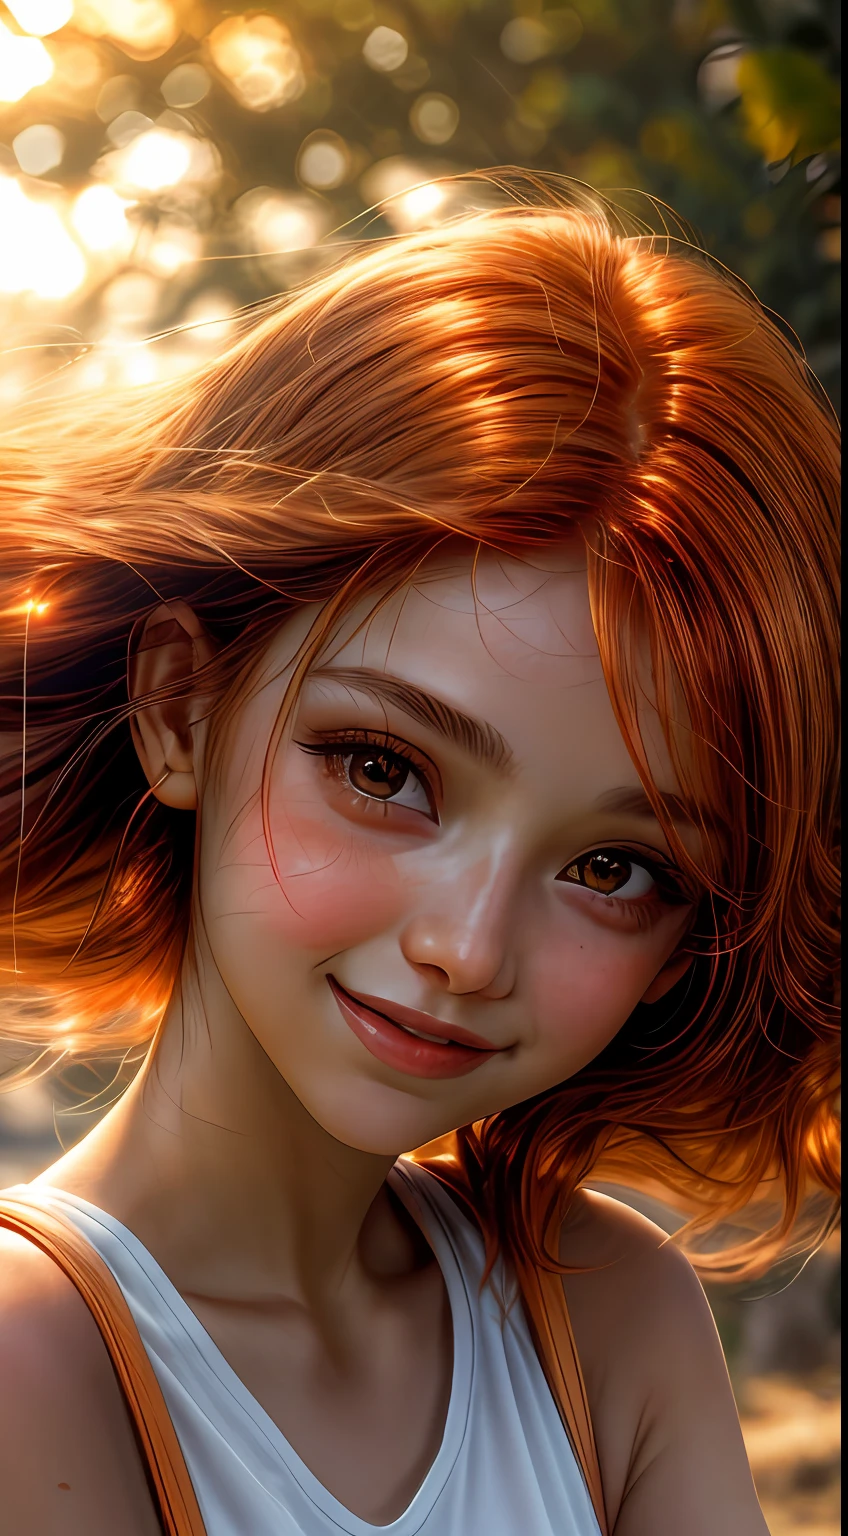 A close-up of a girl's face bathed in orange hues, as if lit by the soft glow of a sunset, her eyes sparkling with joy and contentment, framed by wisps of flowing auburn hair, Photography, shot with a 35mm lens